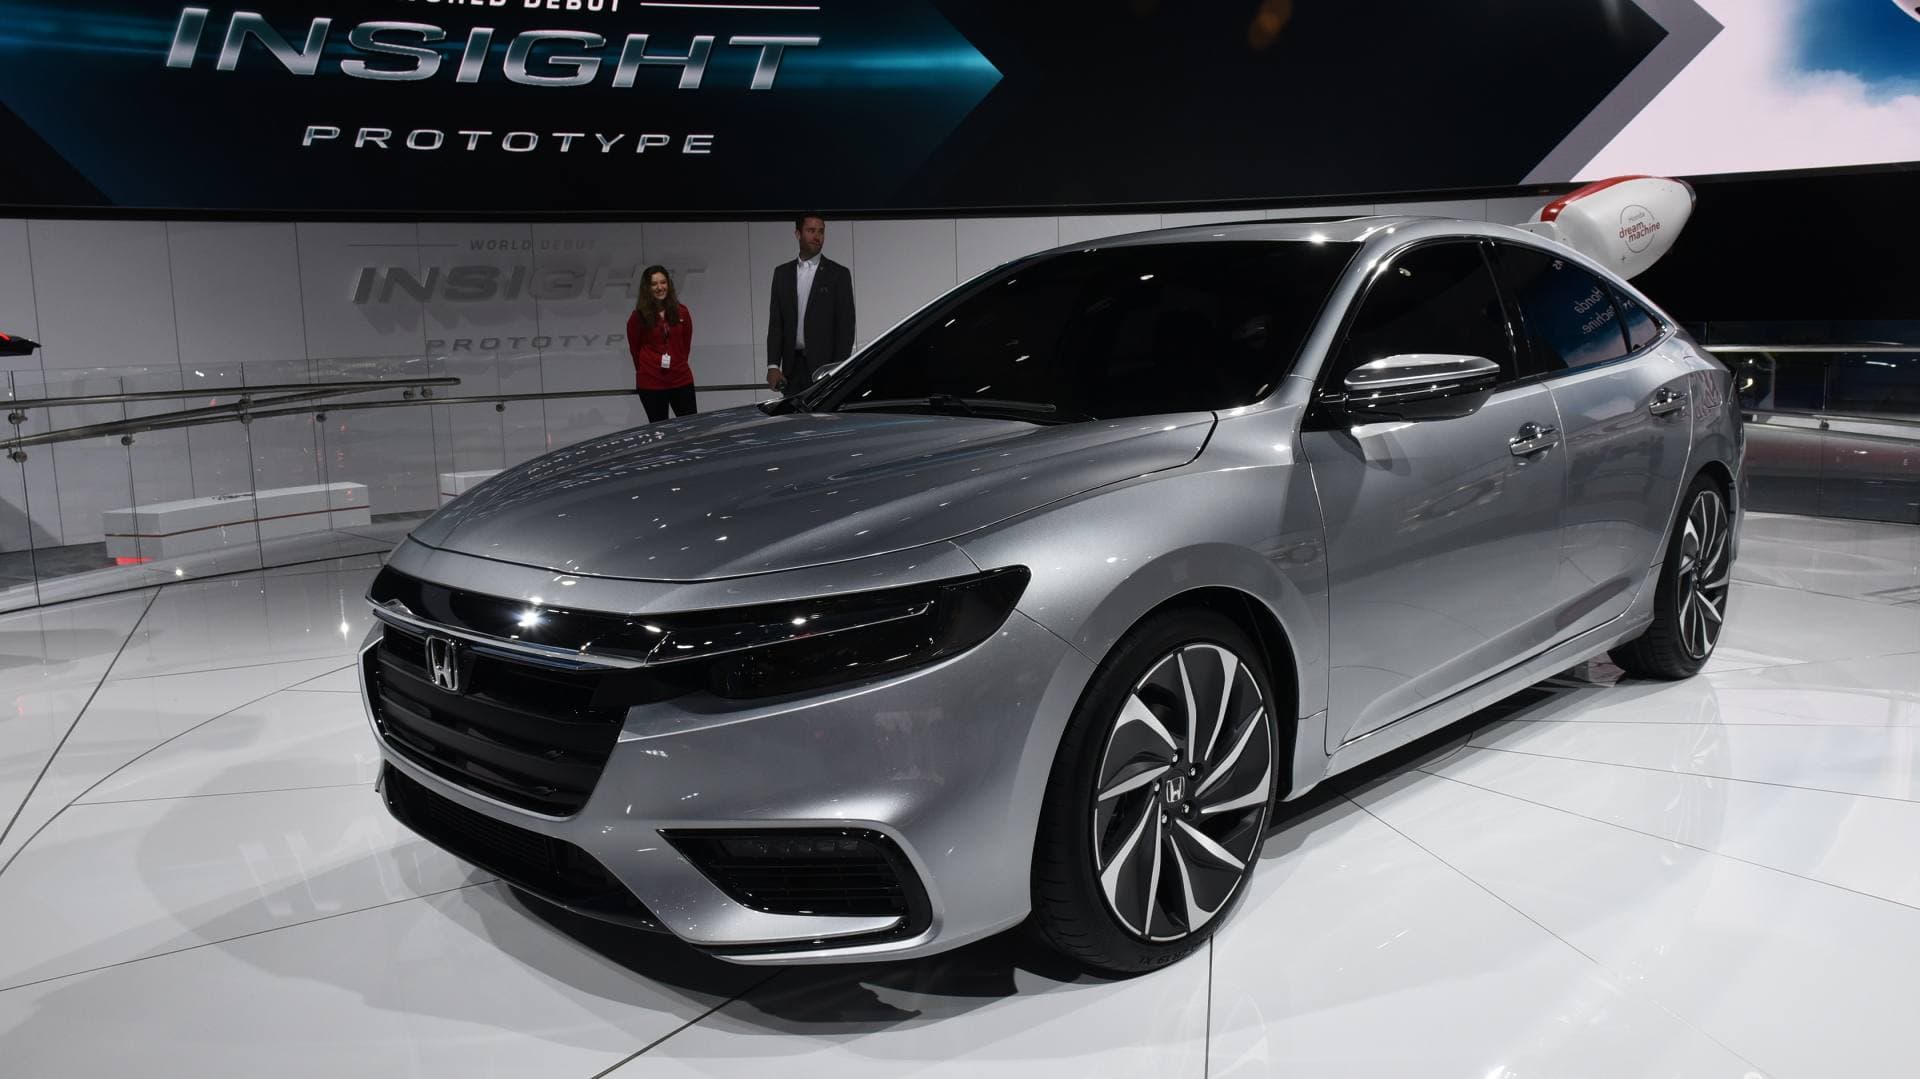 Honda Shows off New Insight to the Public in Detroit